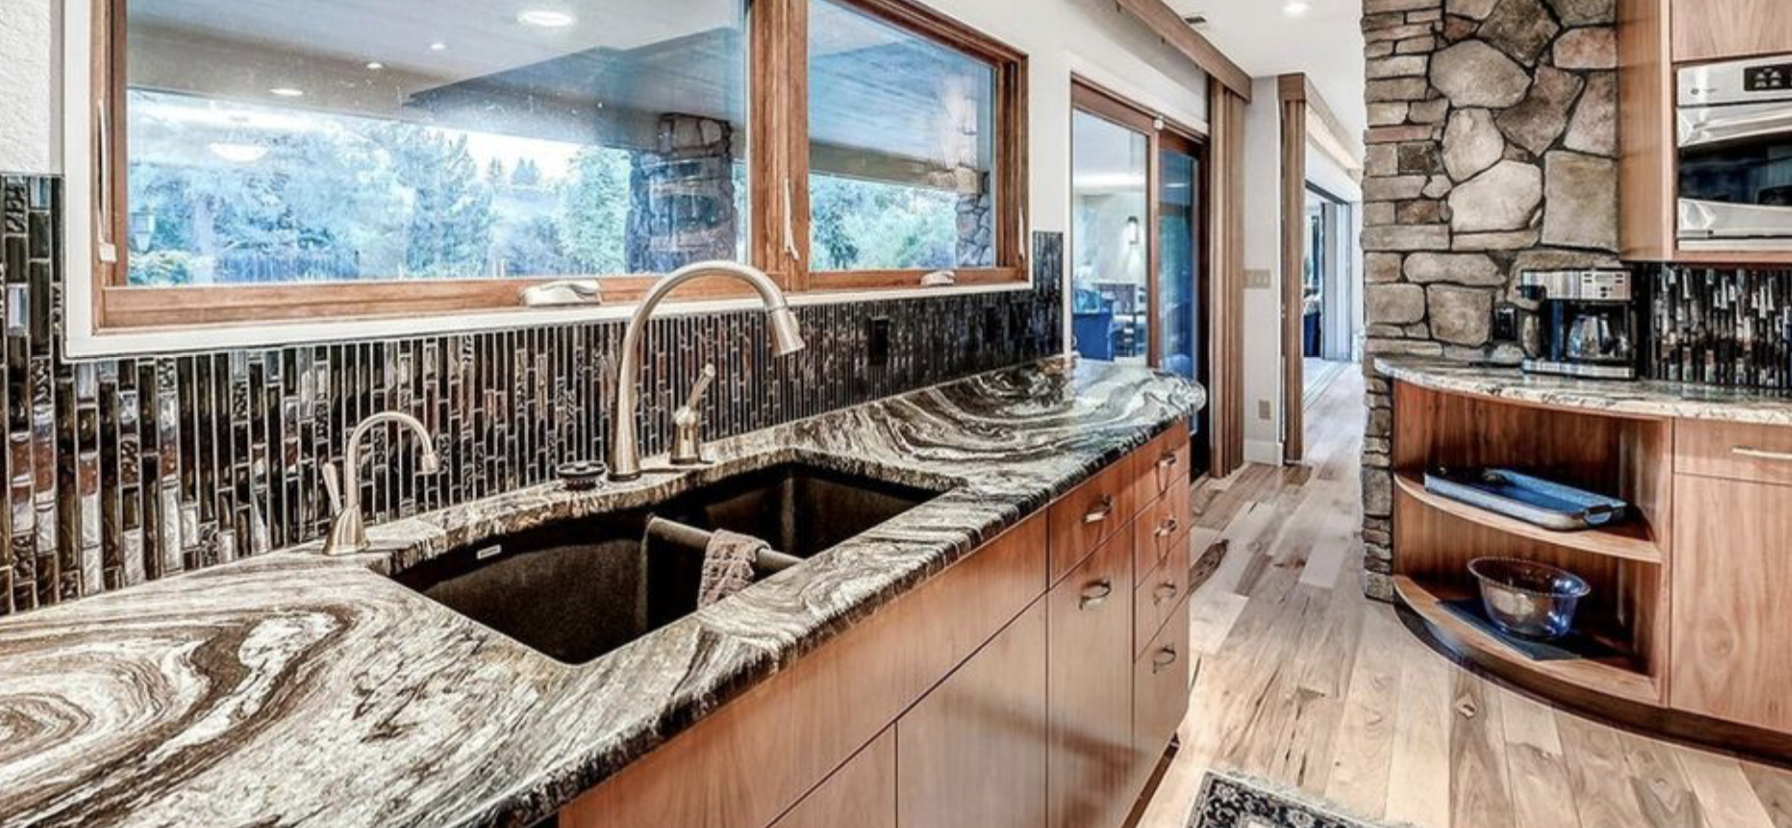 a kitchen with granite counter tops and a sink .